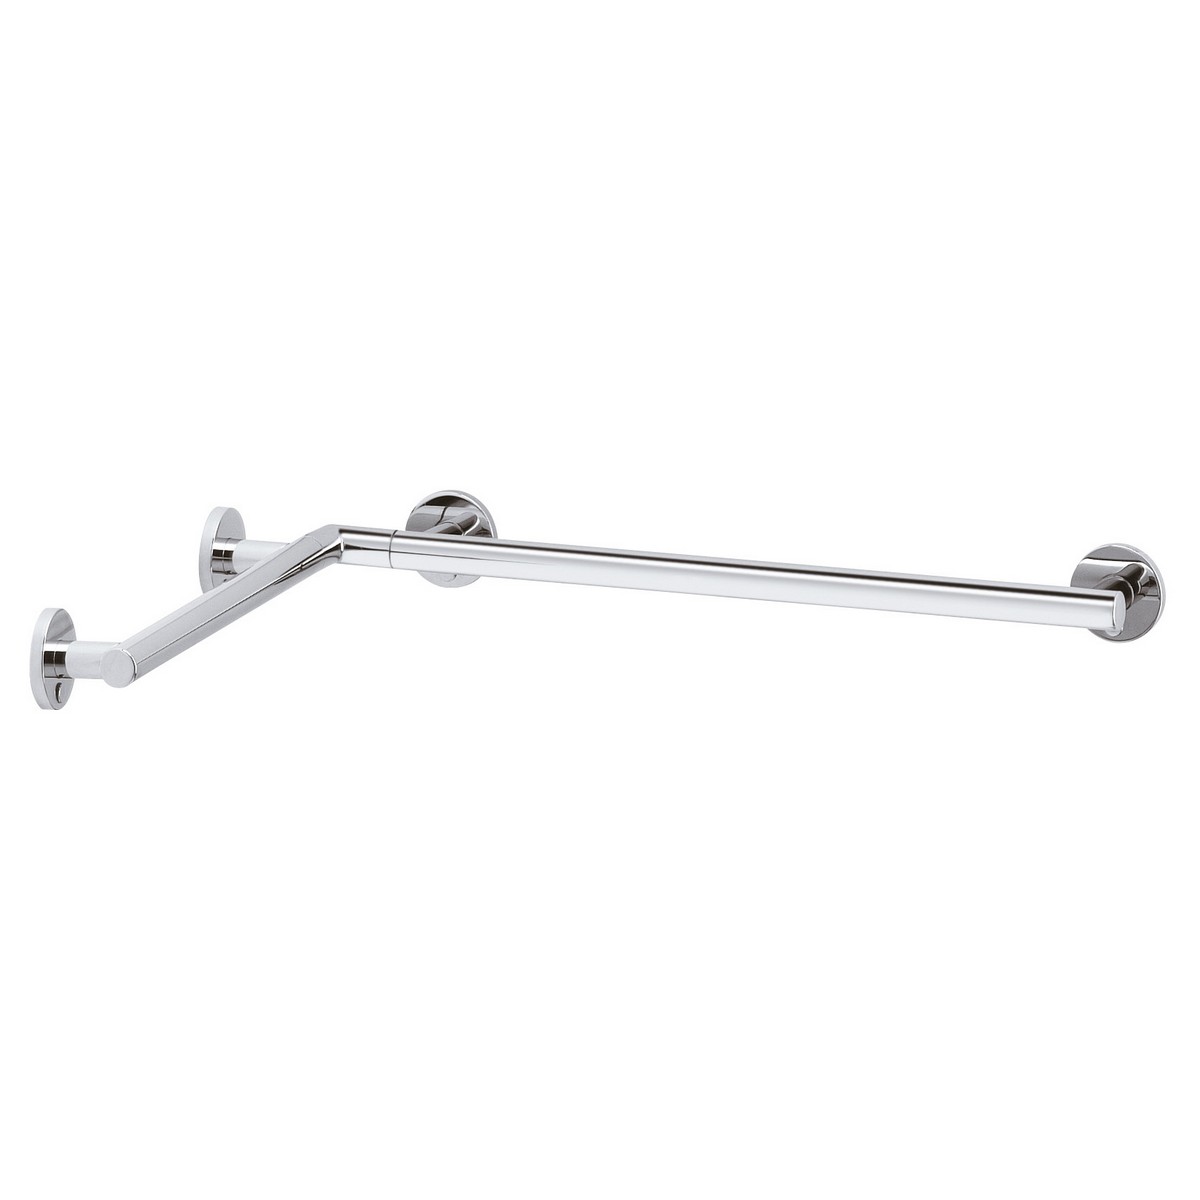 KEUCO 35911013232 PLAN CARE 32 INCH WALL MOUNTED CORNER GRAB BAR FOR SHOWER/TUB IN POLISHED CHROME